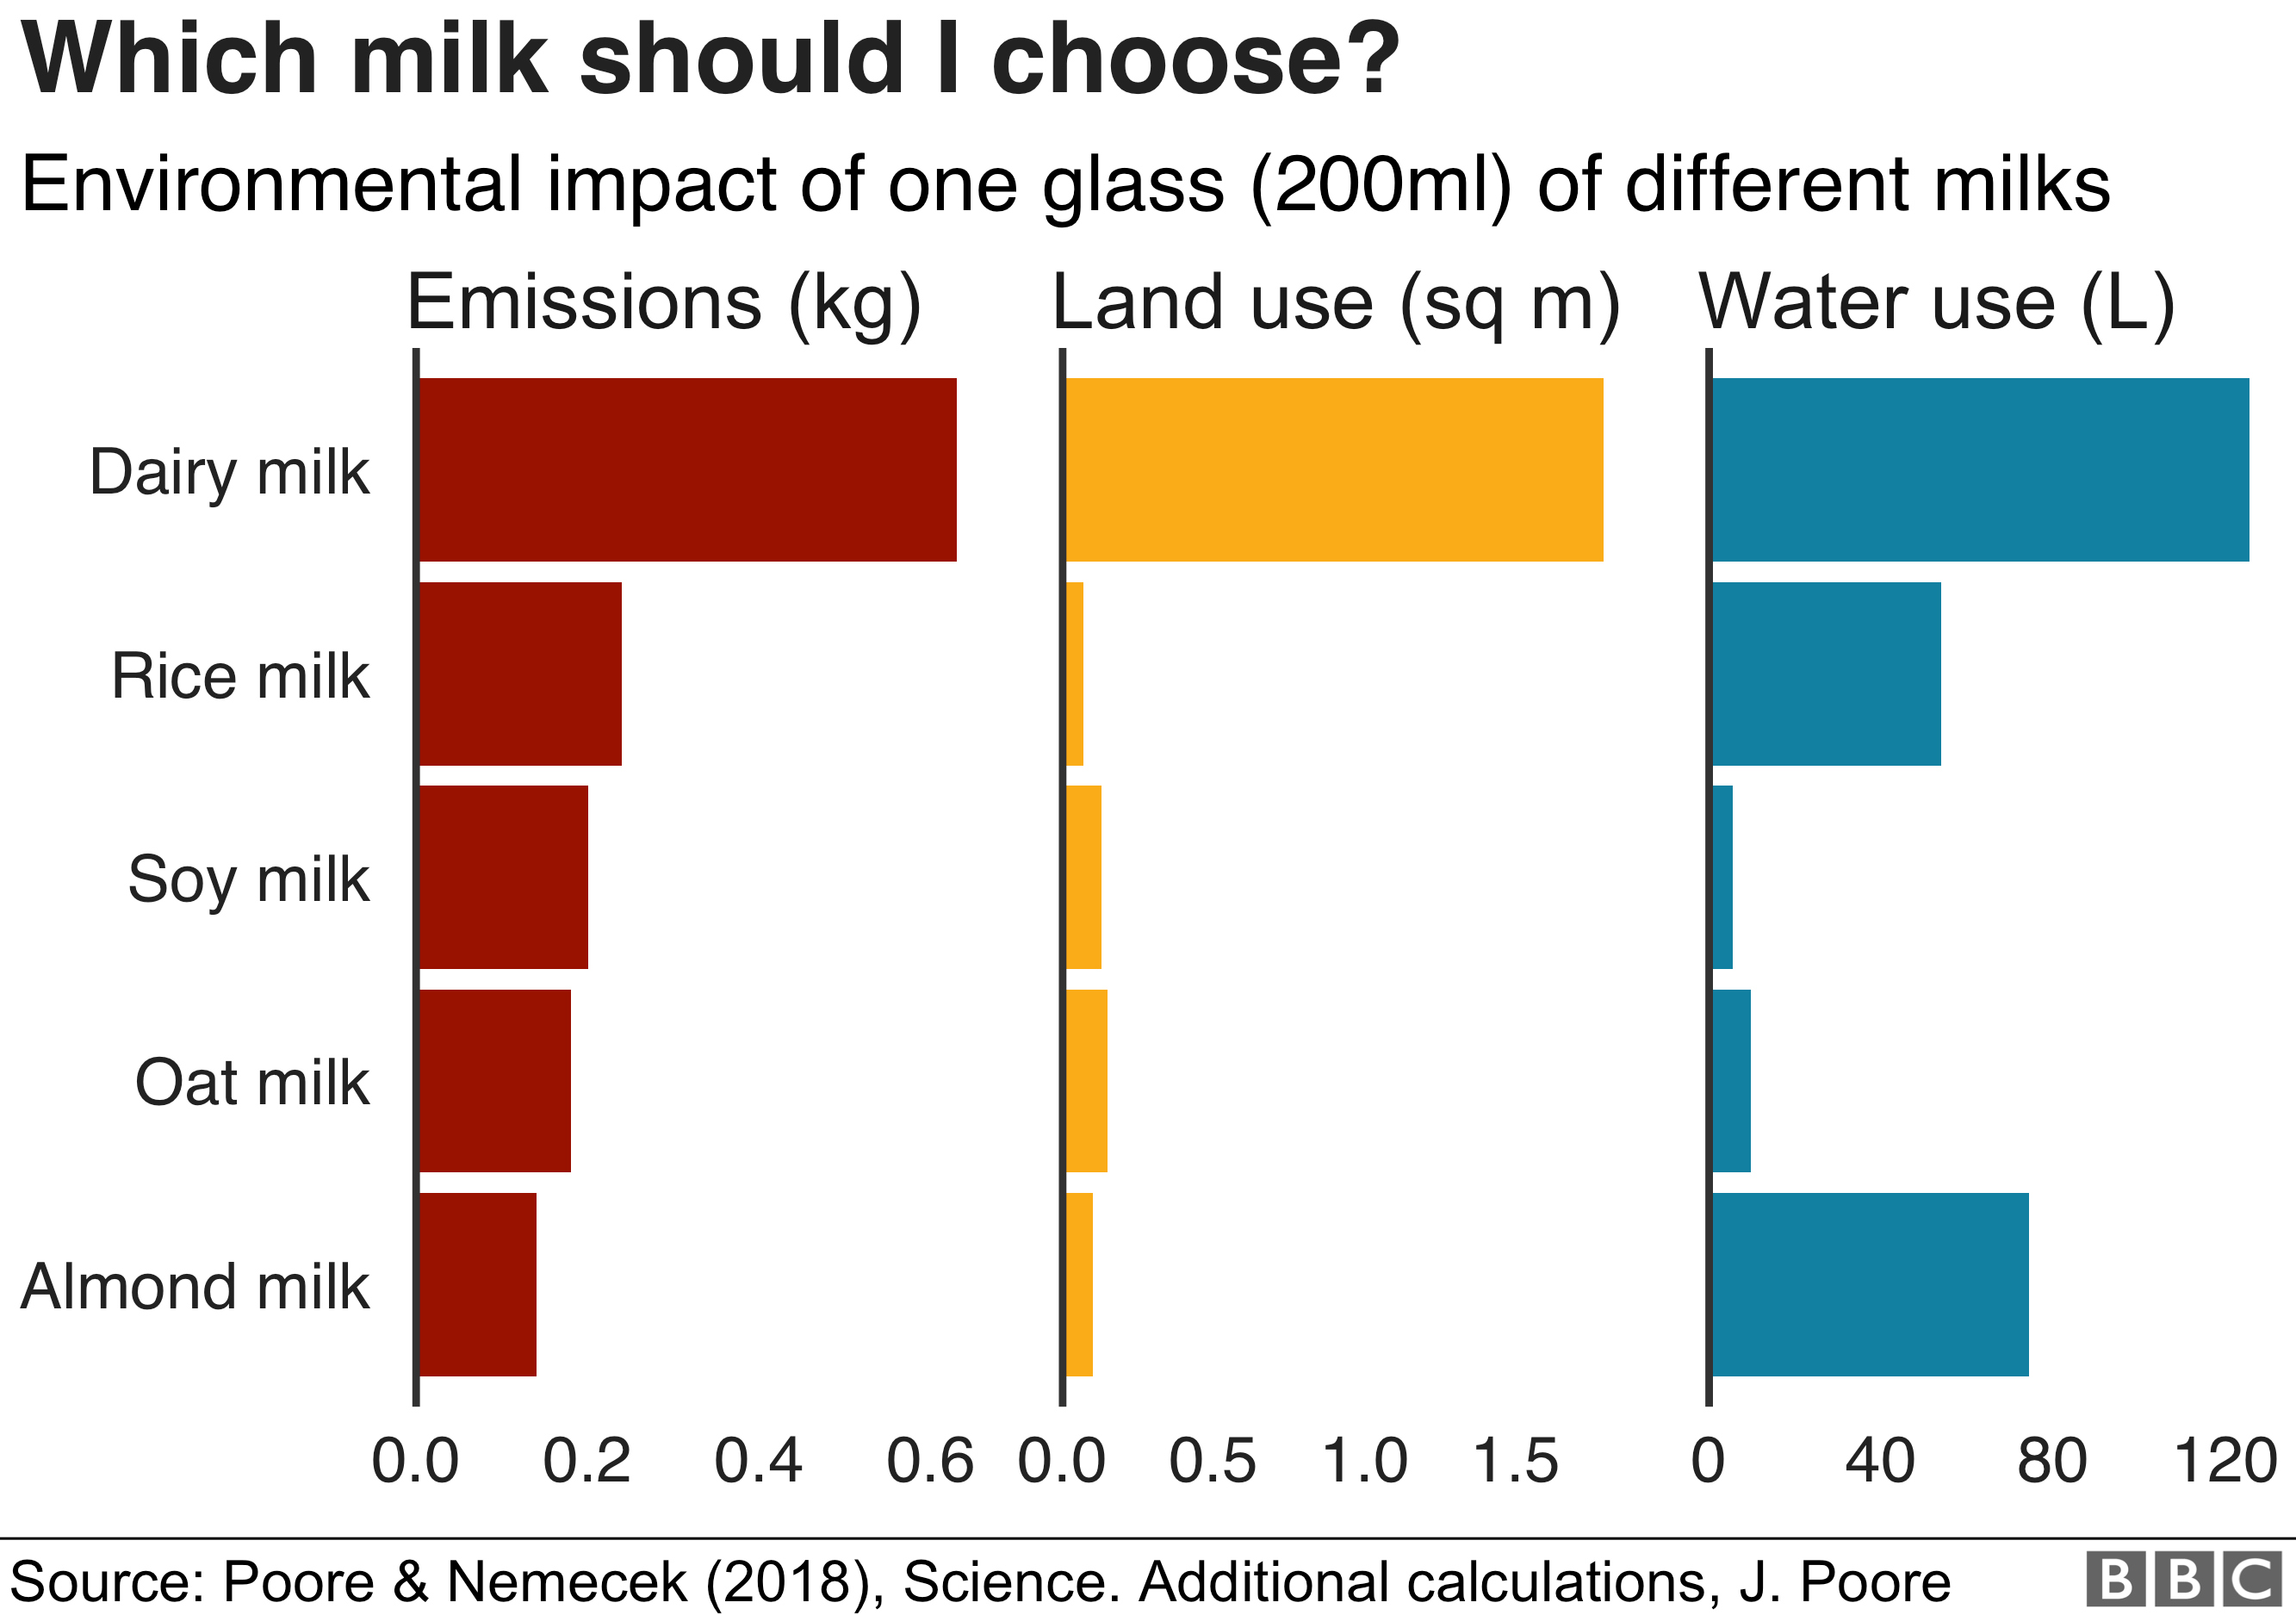 Chart: Climate impact of different milk types